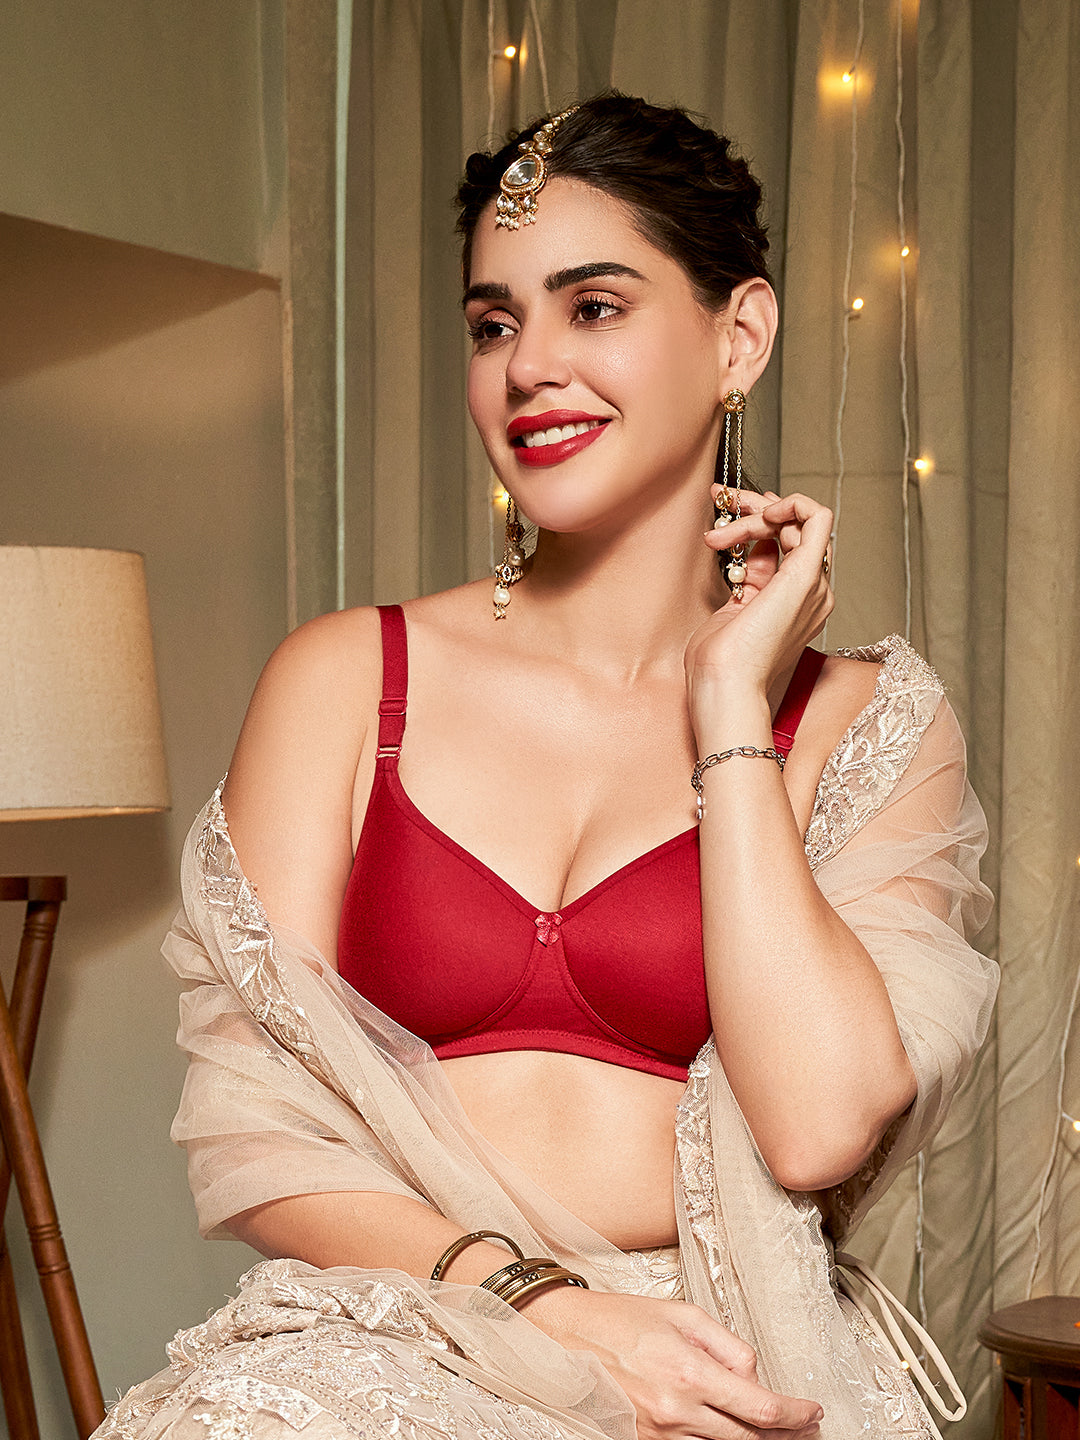 34dd Bralette Bra in Coimbatore - Dealers, Manufacturers & Suppliers  -Justdial